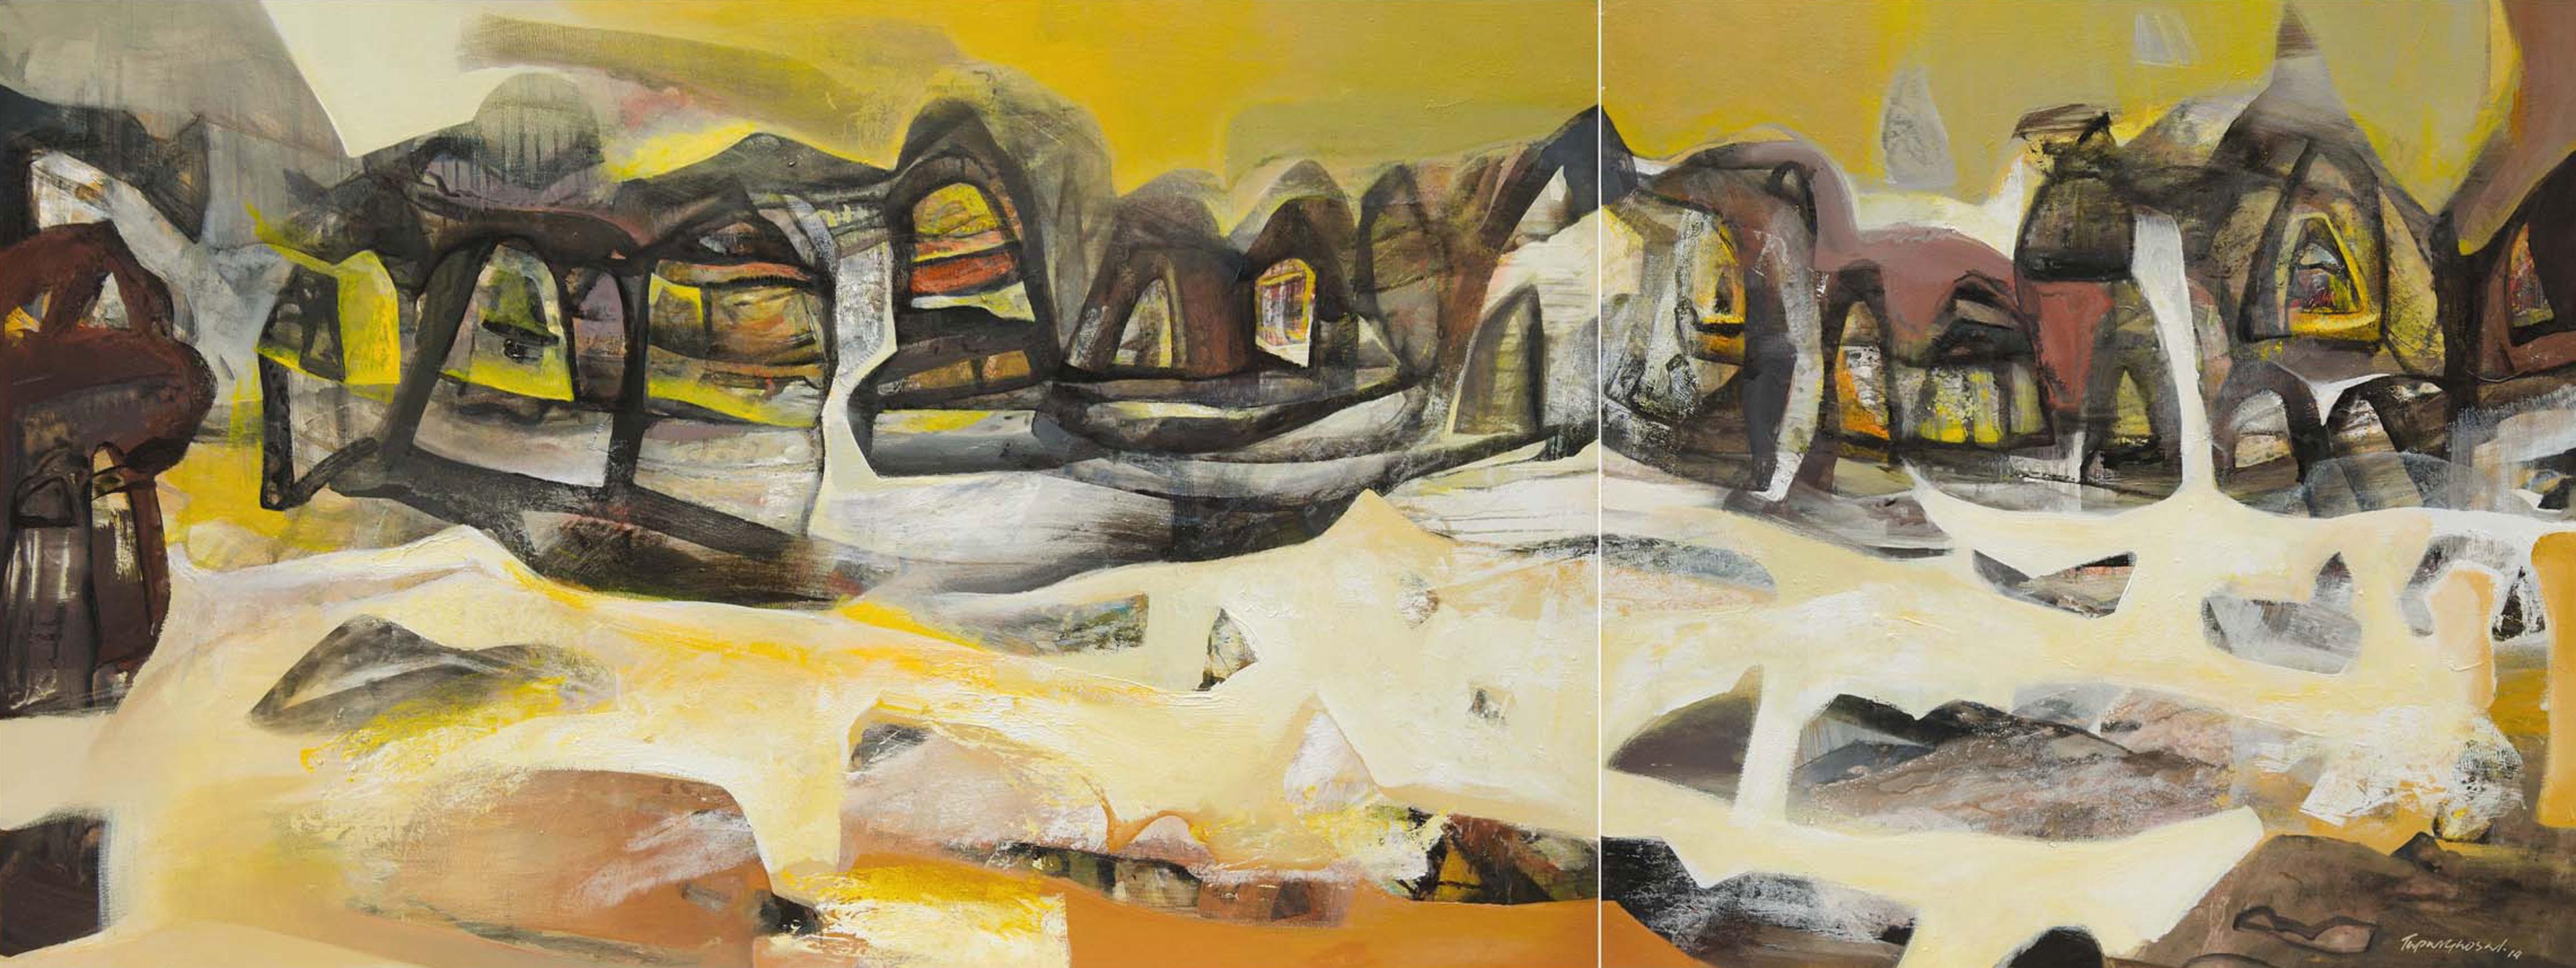 Beneras, Diptych, Abstract, Acrylic on canvas, Yellow, Brown, White "In Stock"